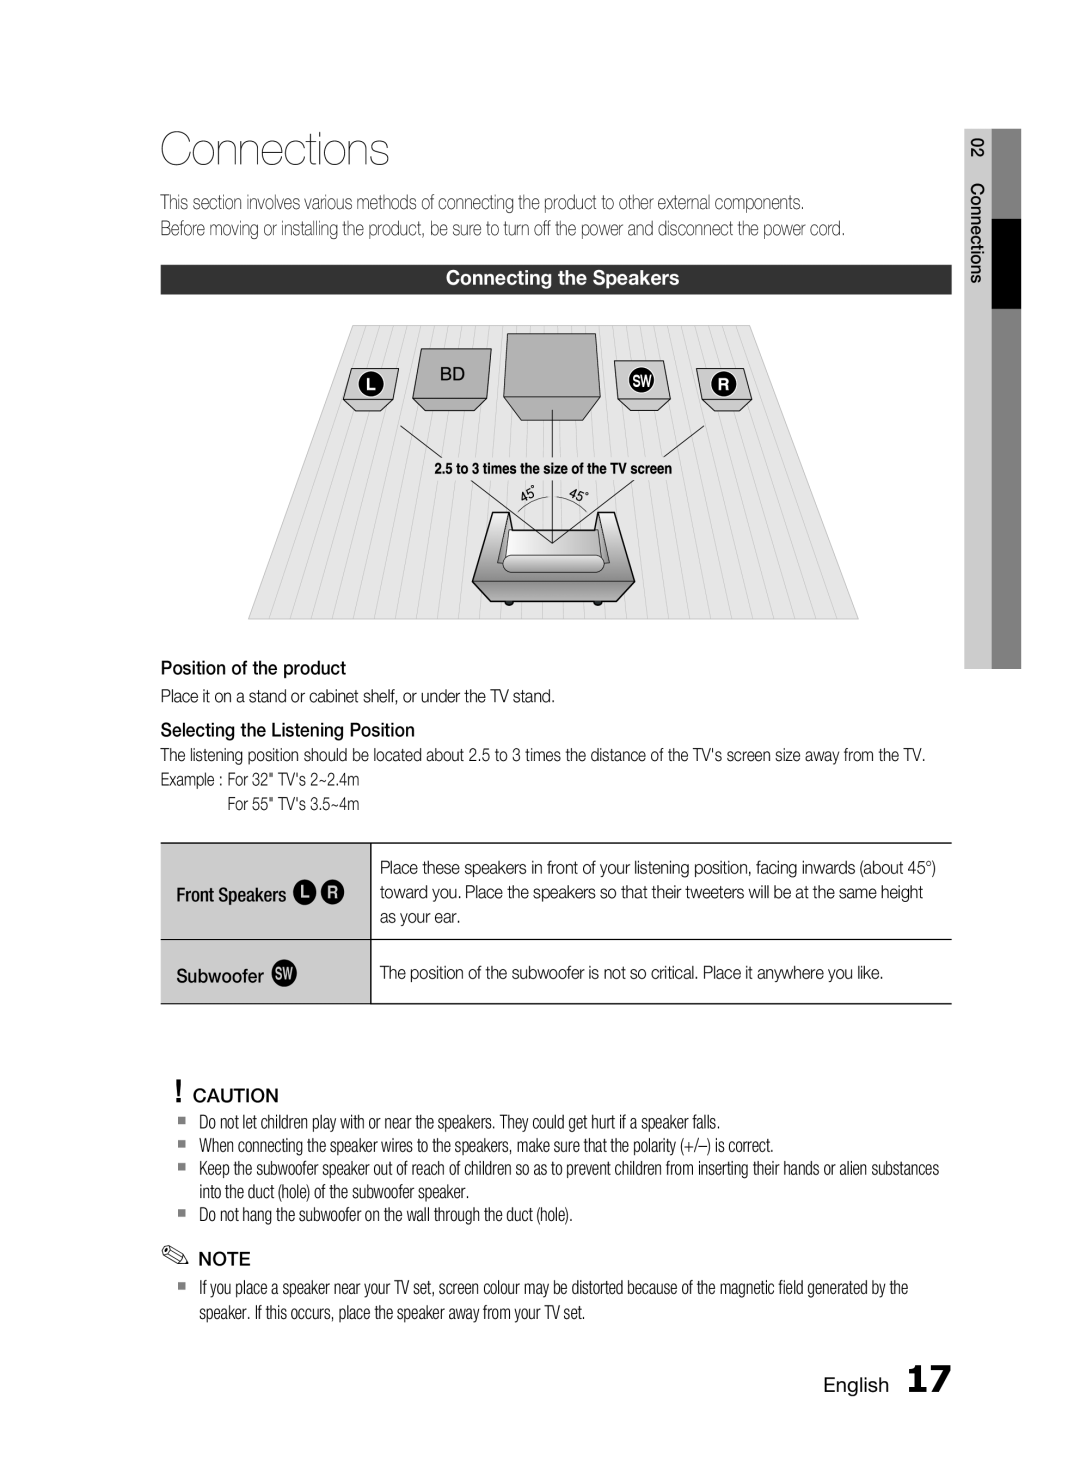 Samsung HT-C5200 user manual Connections, Connecting the Speakers, English 